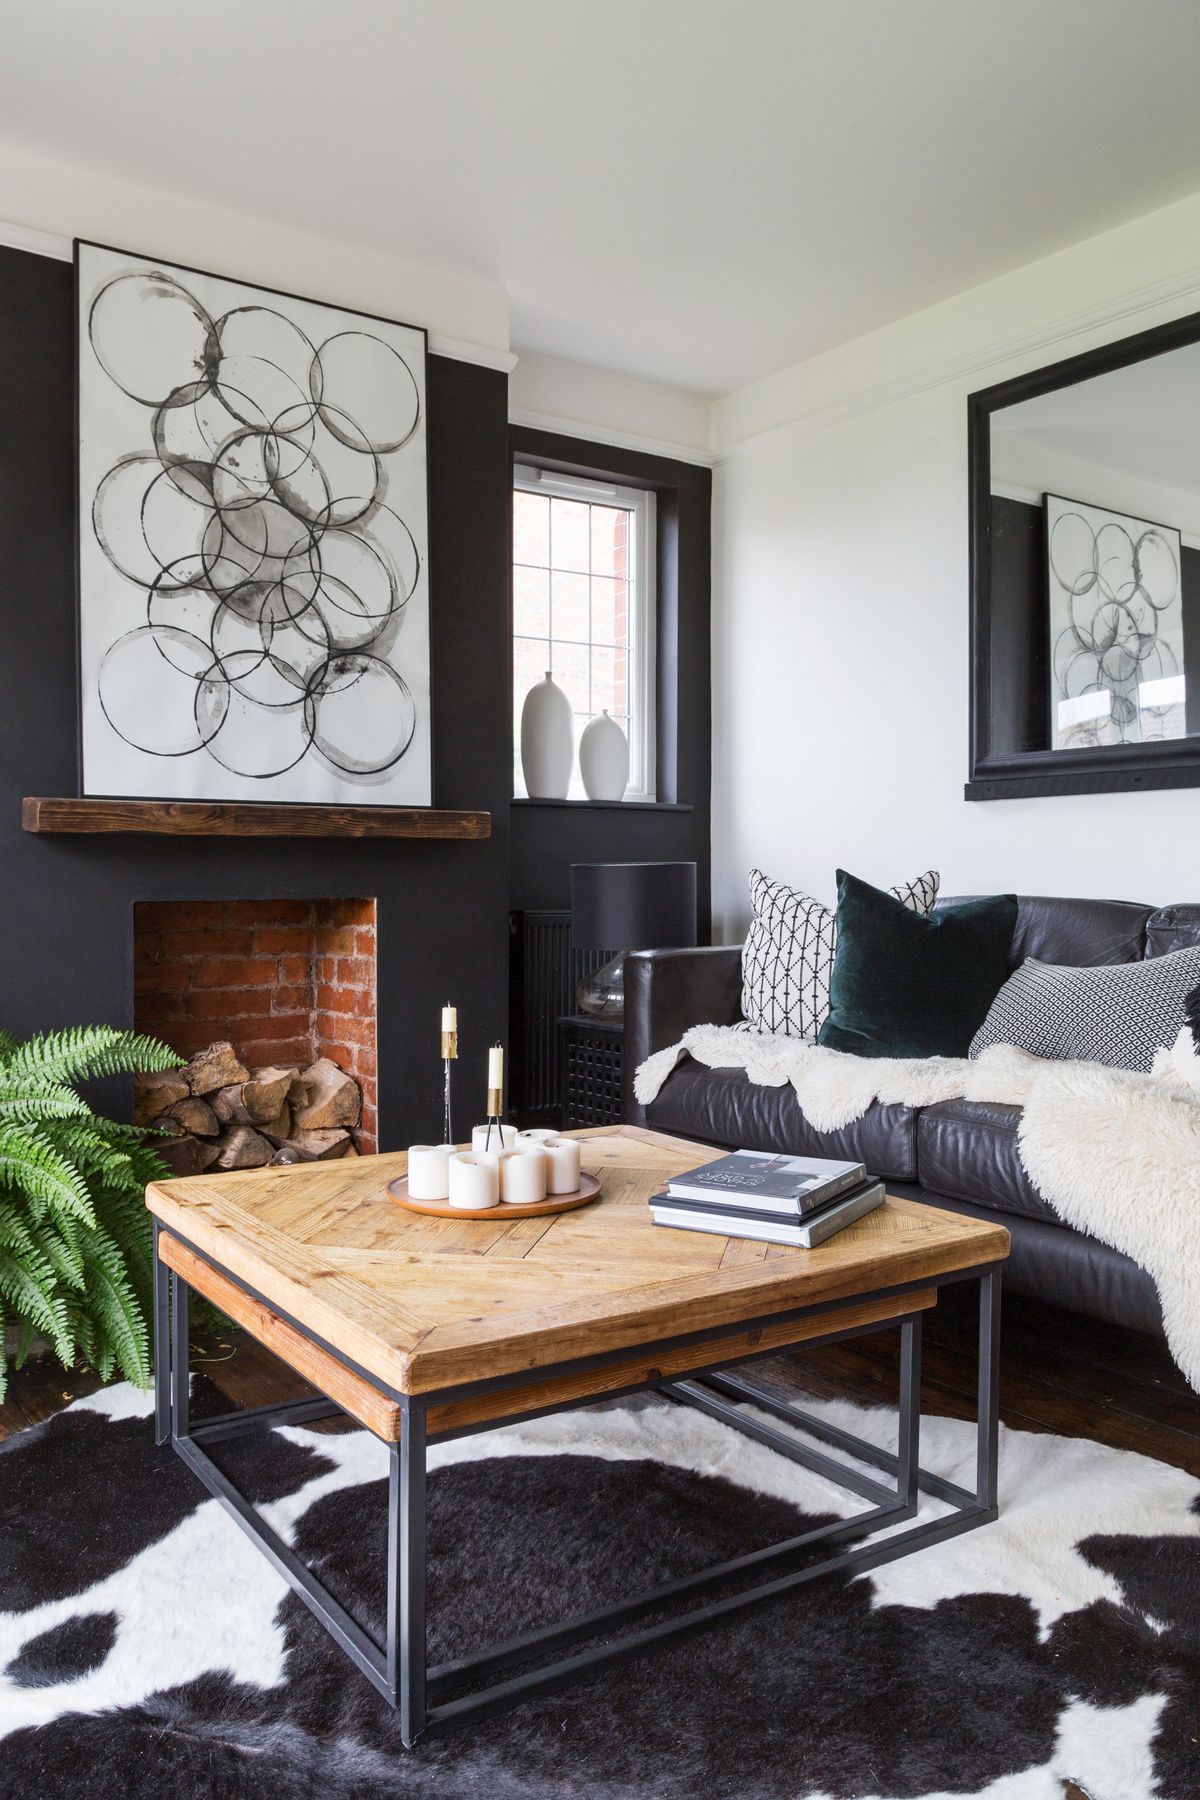 20 black living room ideas to tempt you over to the dark side ...